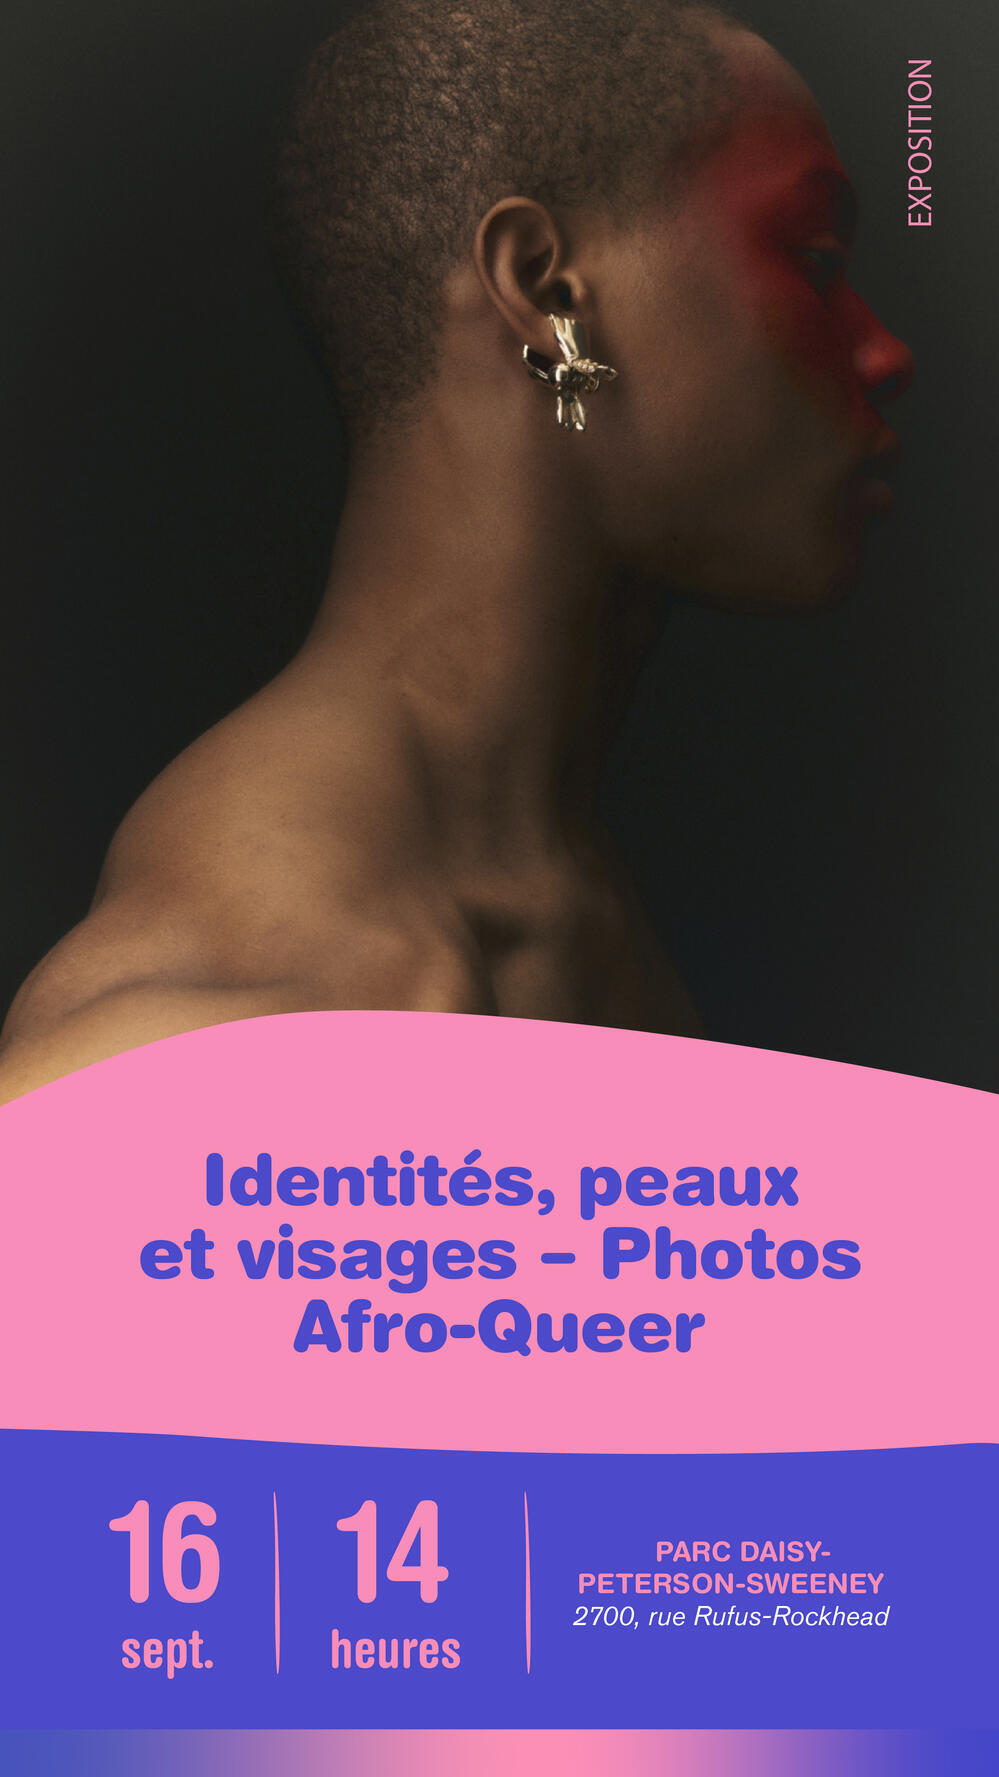 Identities, skins, and faces — a photographic look at Afro-Queer Identities